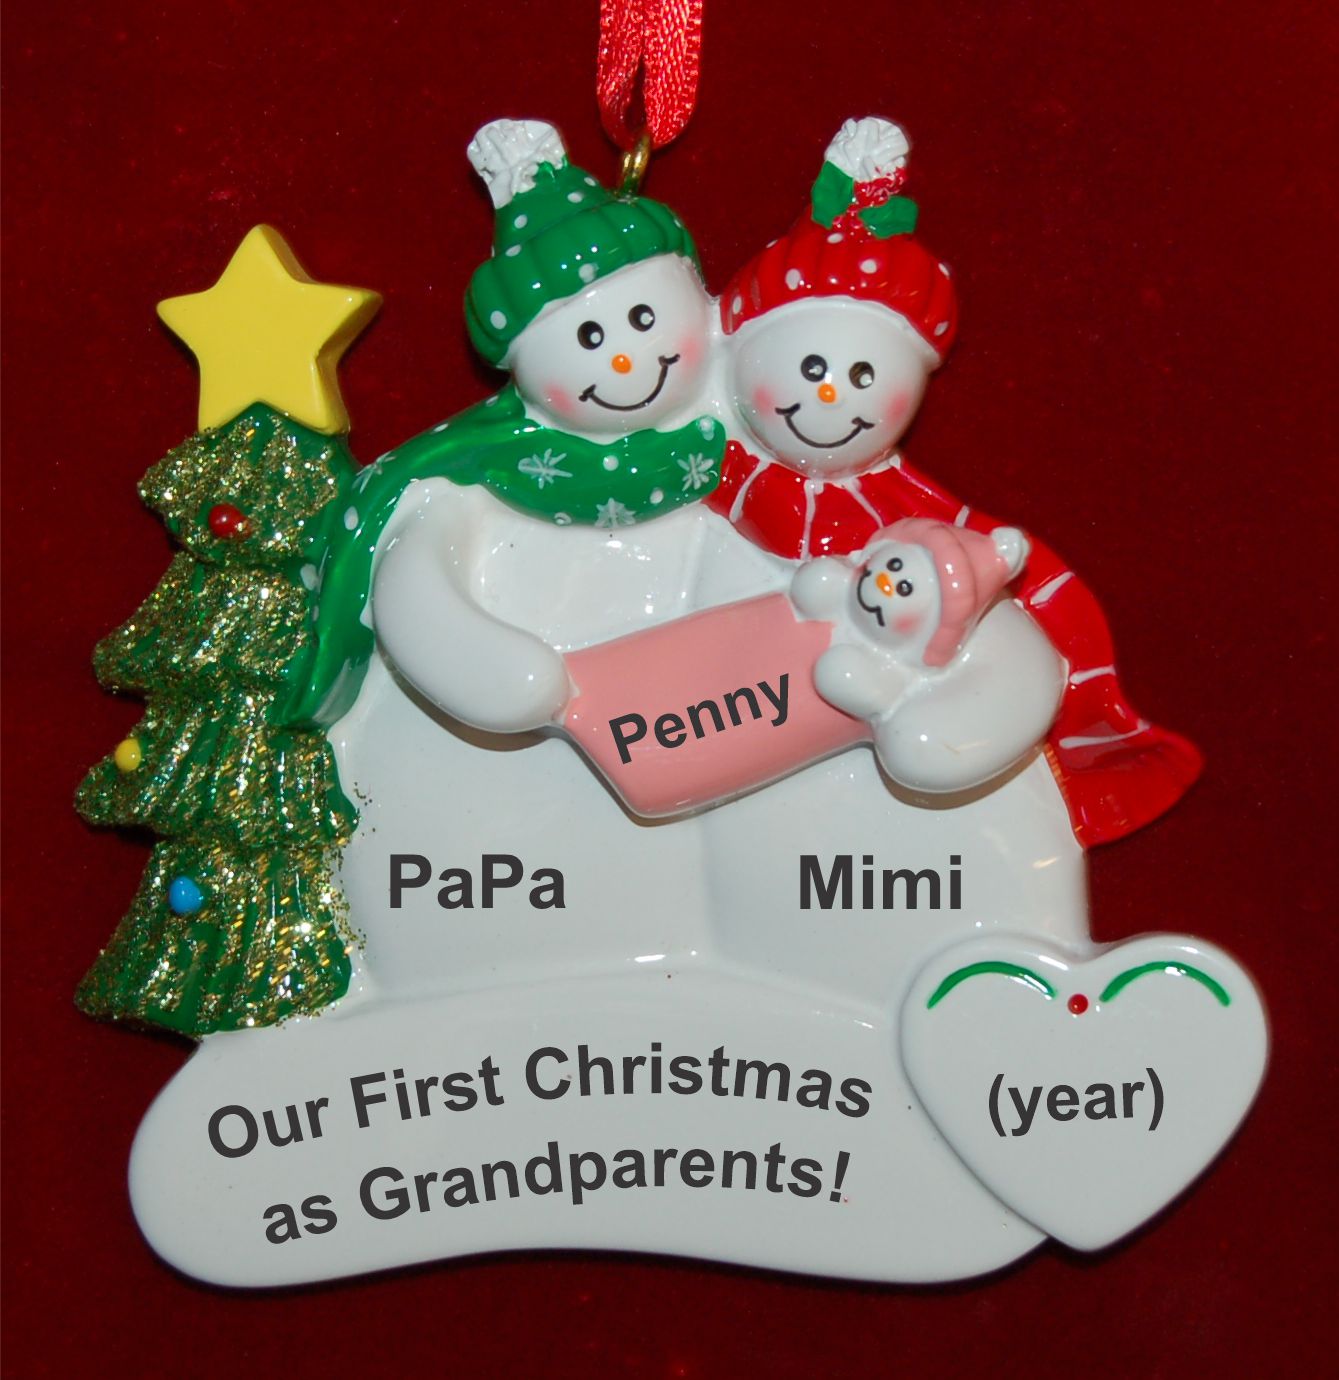 Our First Christmas as Grandparents with Baby Girl Christmas Ornament Personalized by Russell Rhodes